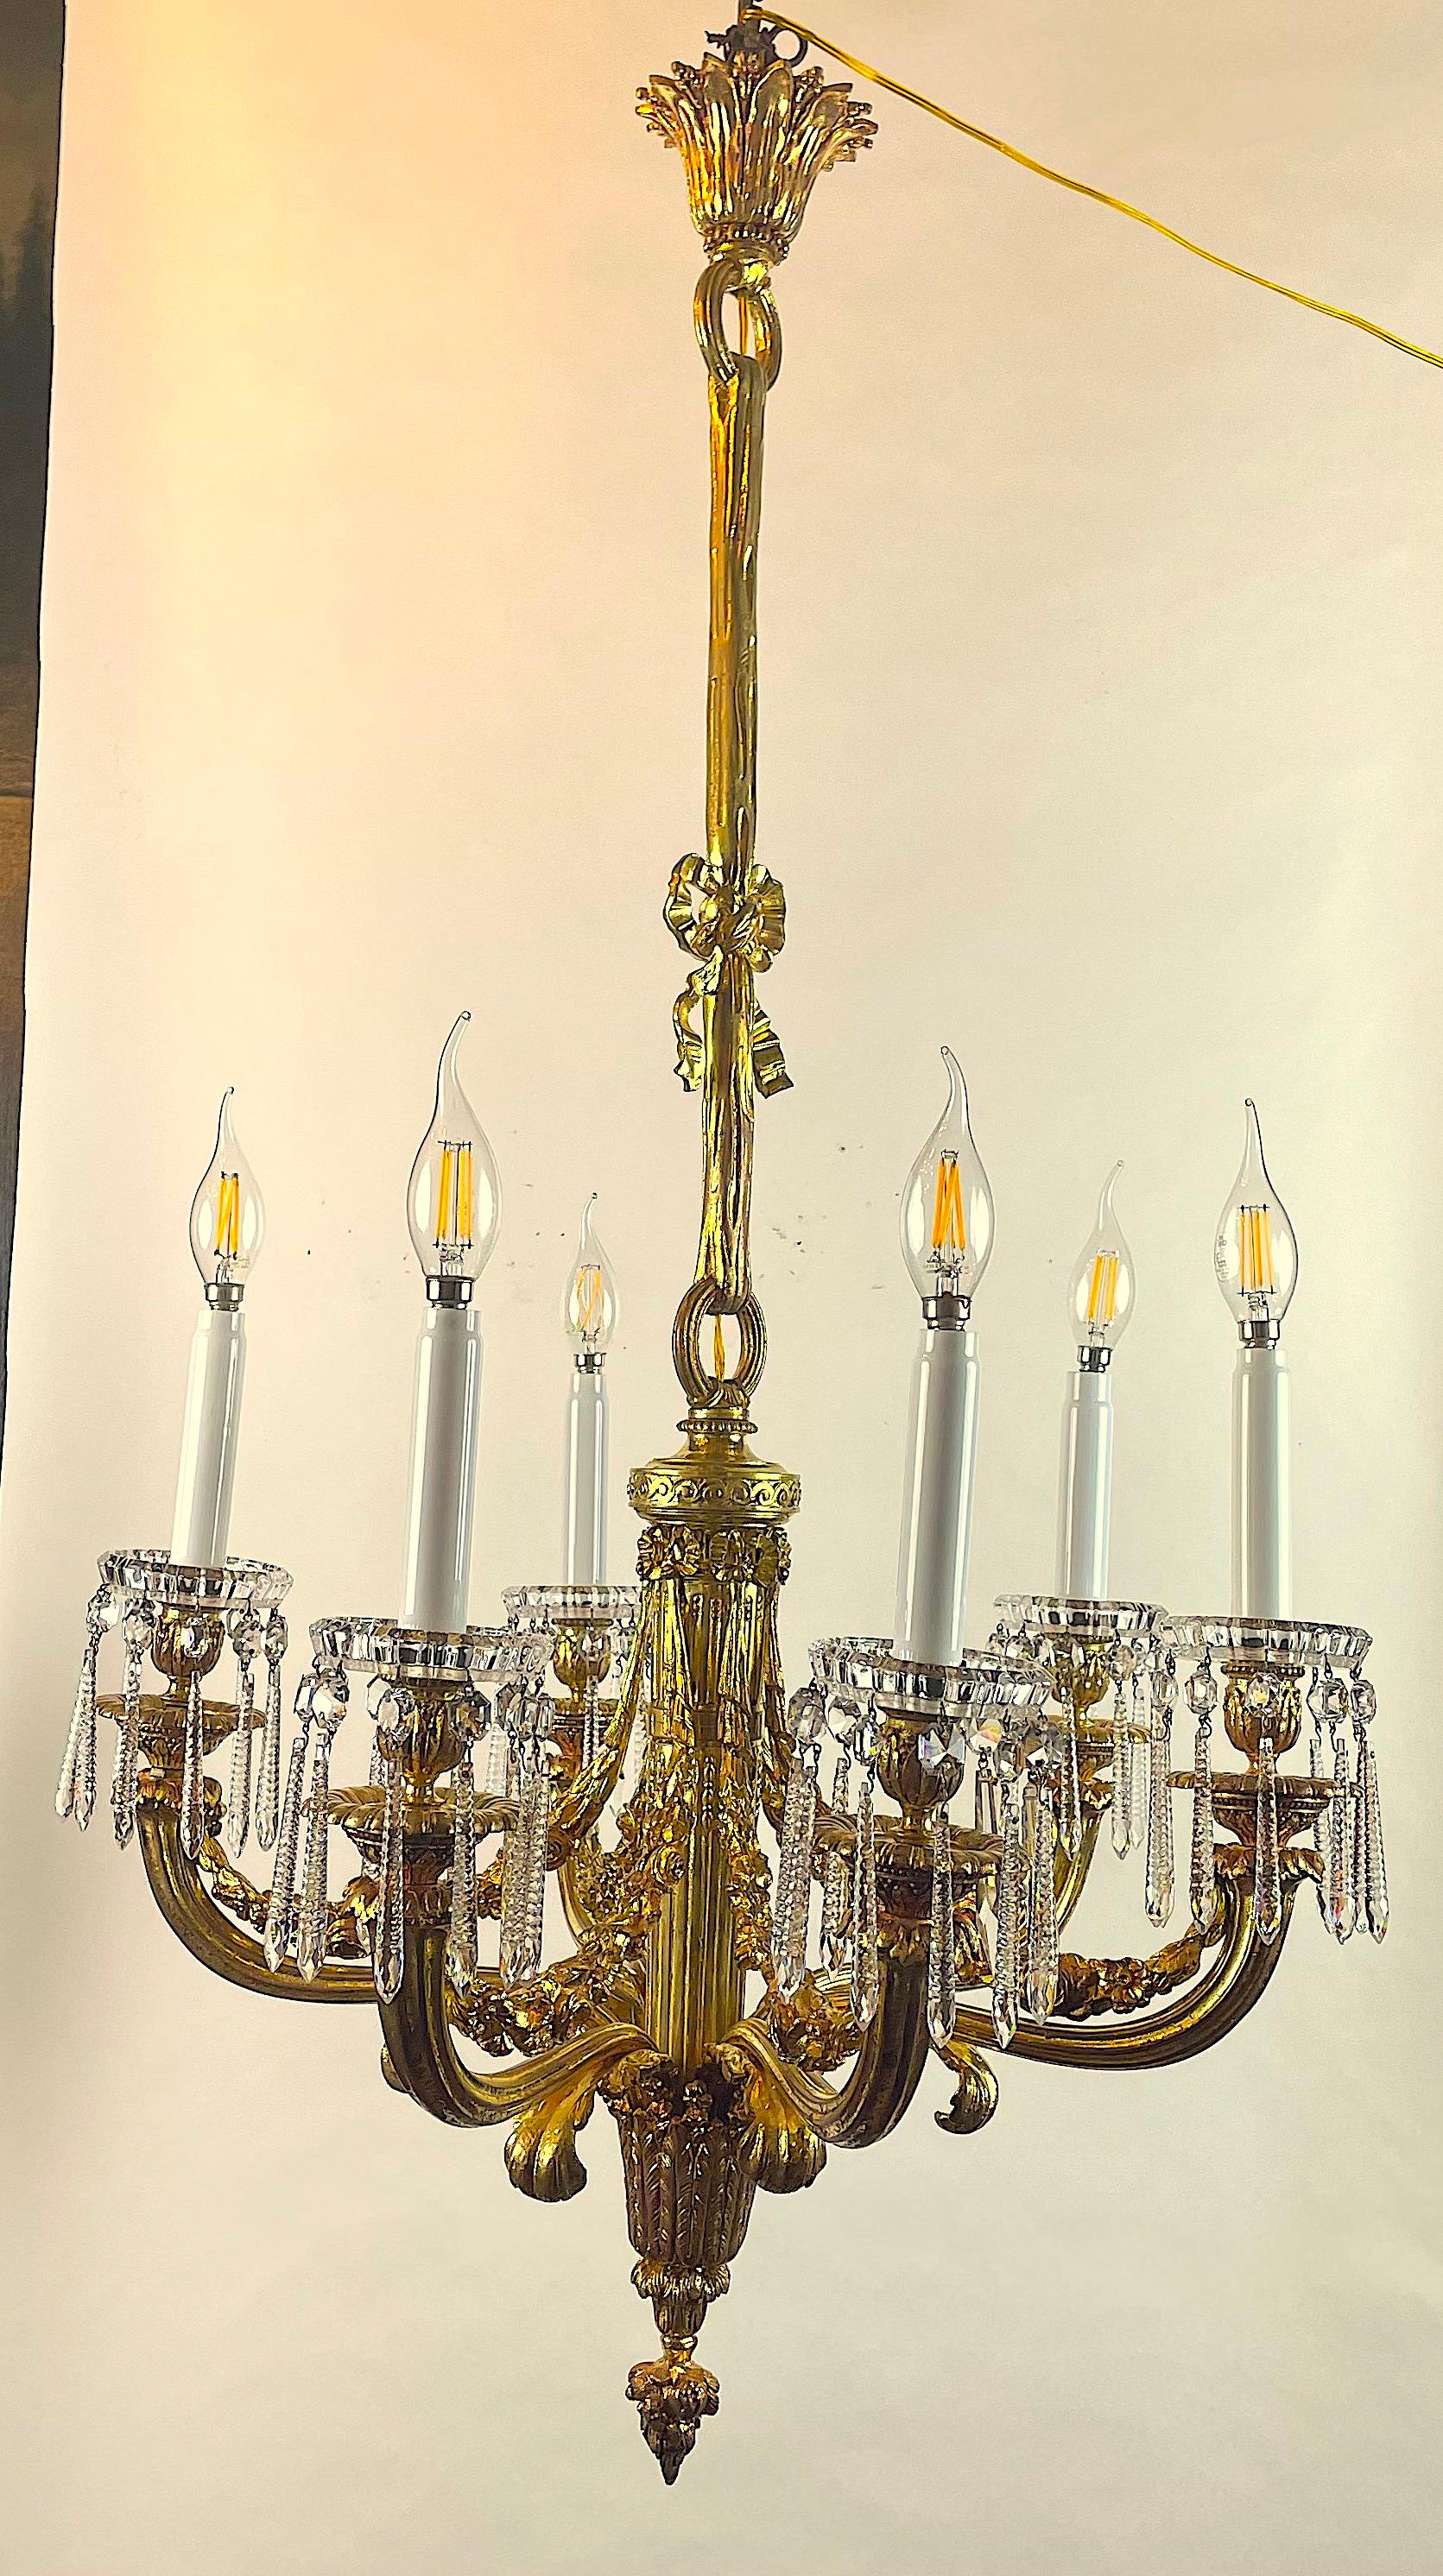 Baccarat Crystal and Ormolu Chandelier French 20th Century Empire Style Pendant 8